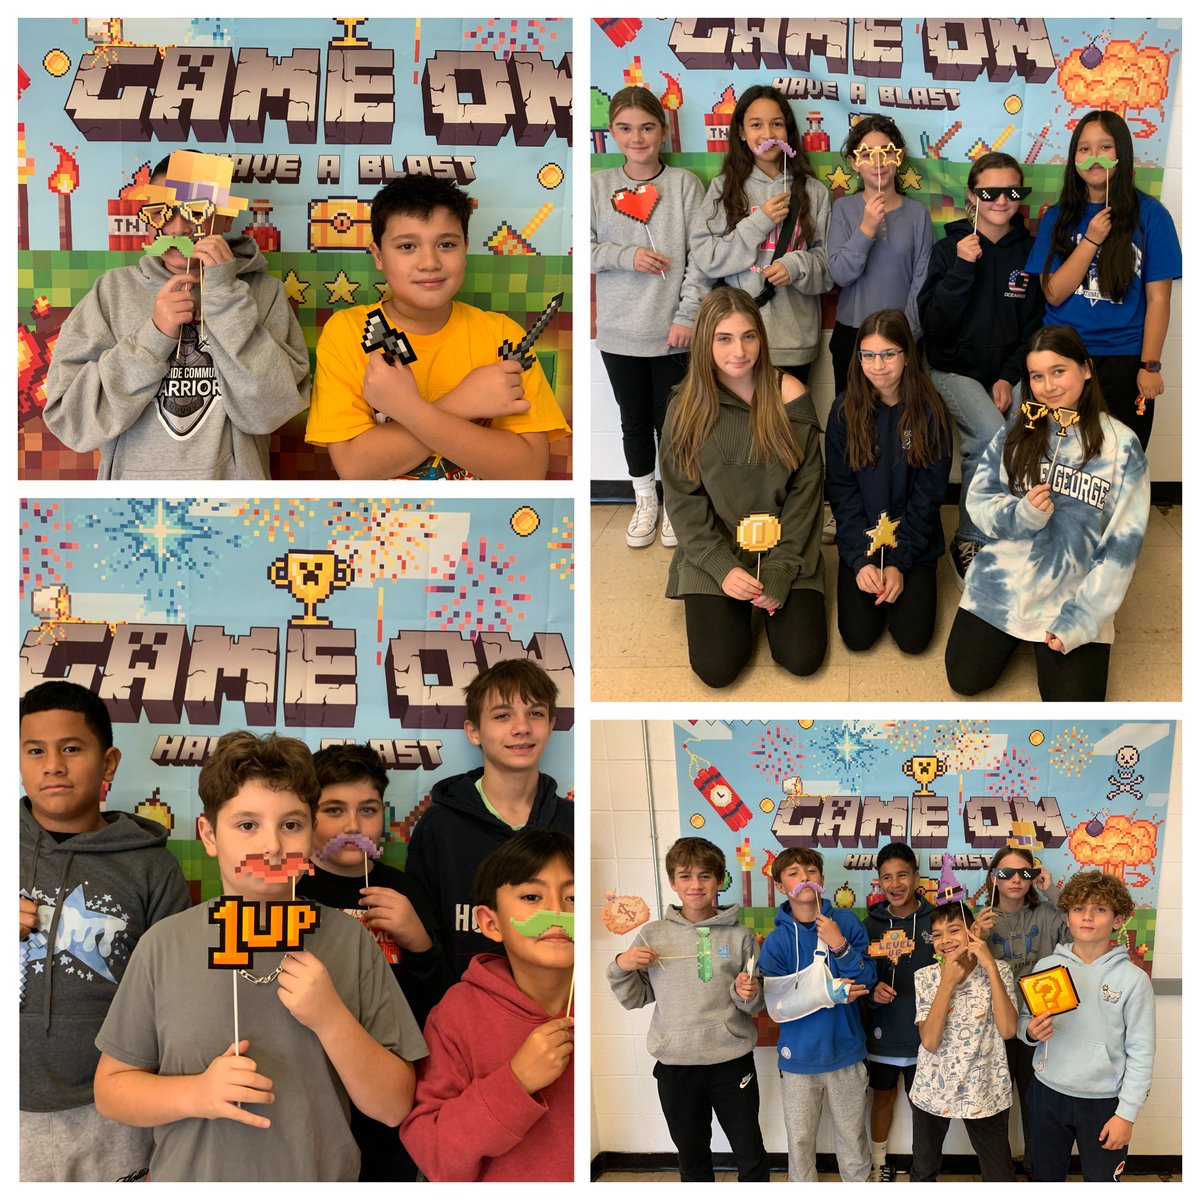 Part 2!! So much fun during our Arcade Day celebrating days and days of hard work! Students were able to play all of their teamates' games while enjoying some photo ops! @Bloxels1 @OMS_NY @MrsFWasserman #bloxels #gameon #middleschoollibrary #middleschool #saycheese @Mrs_Lupia_